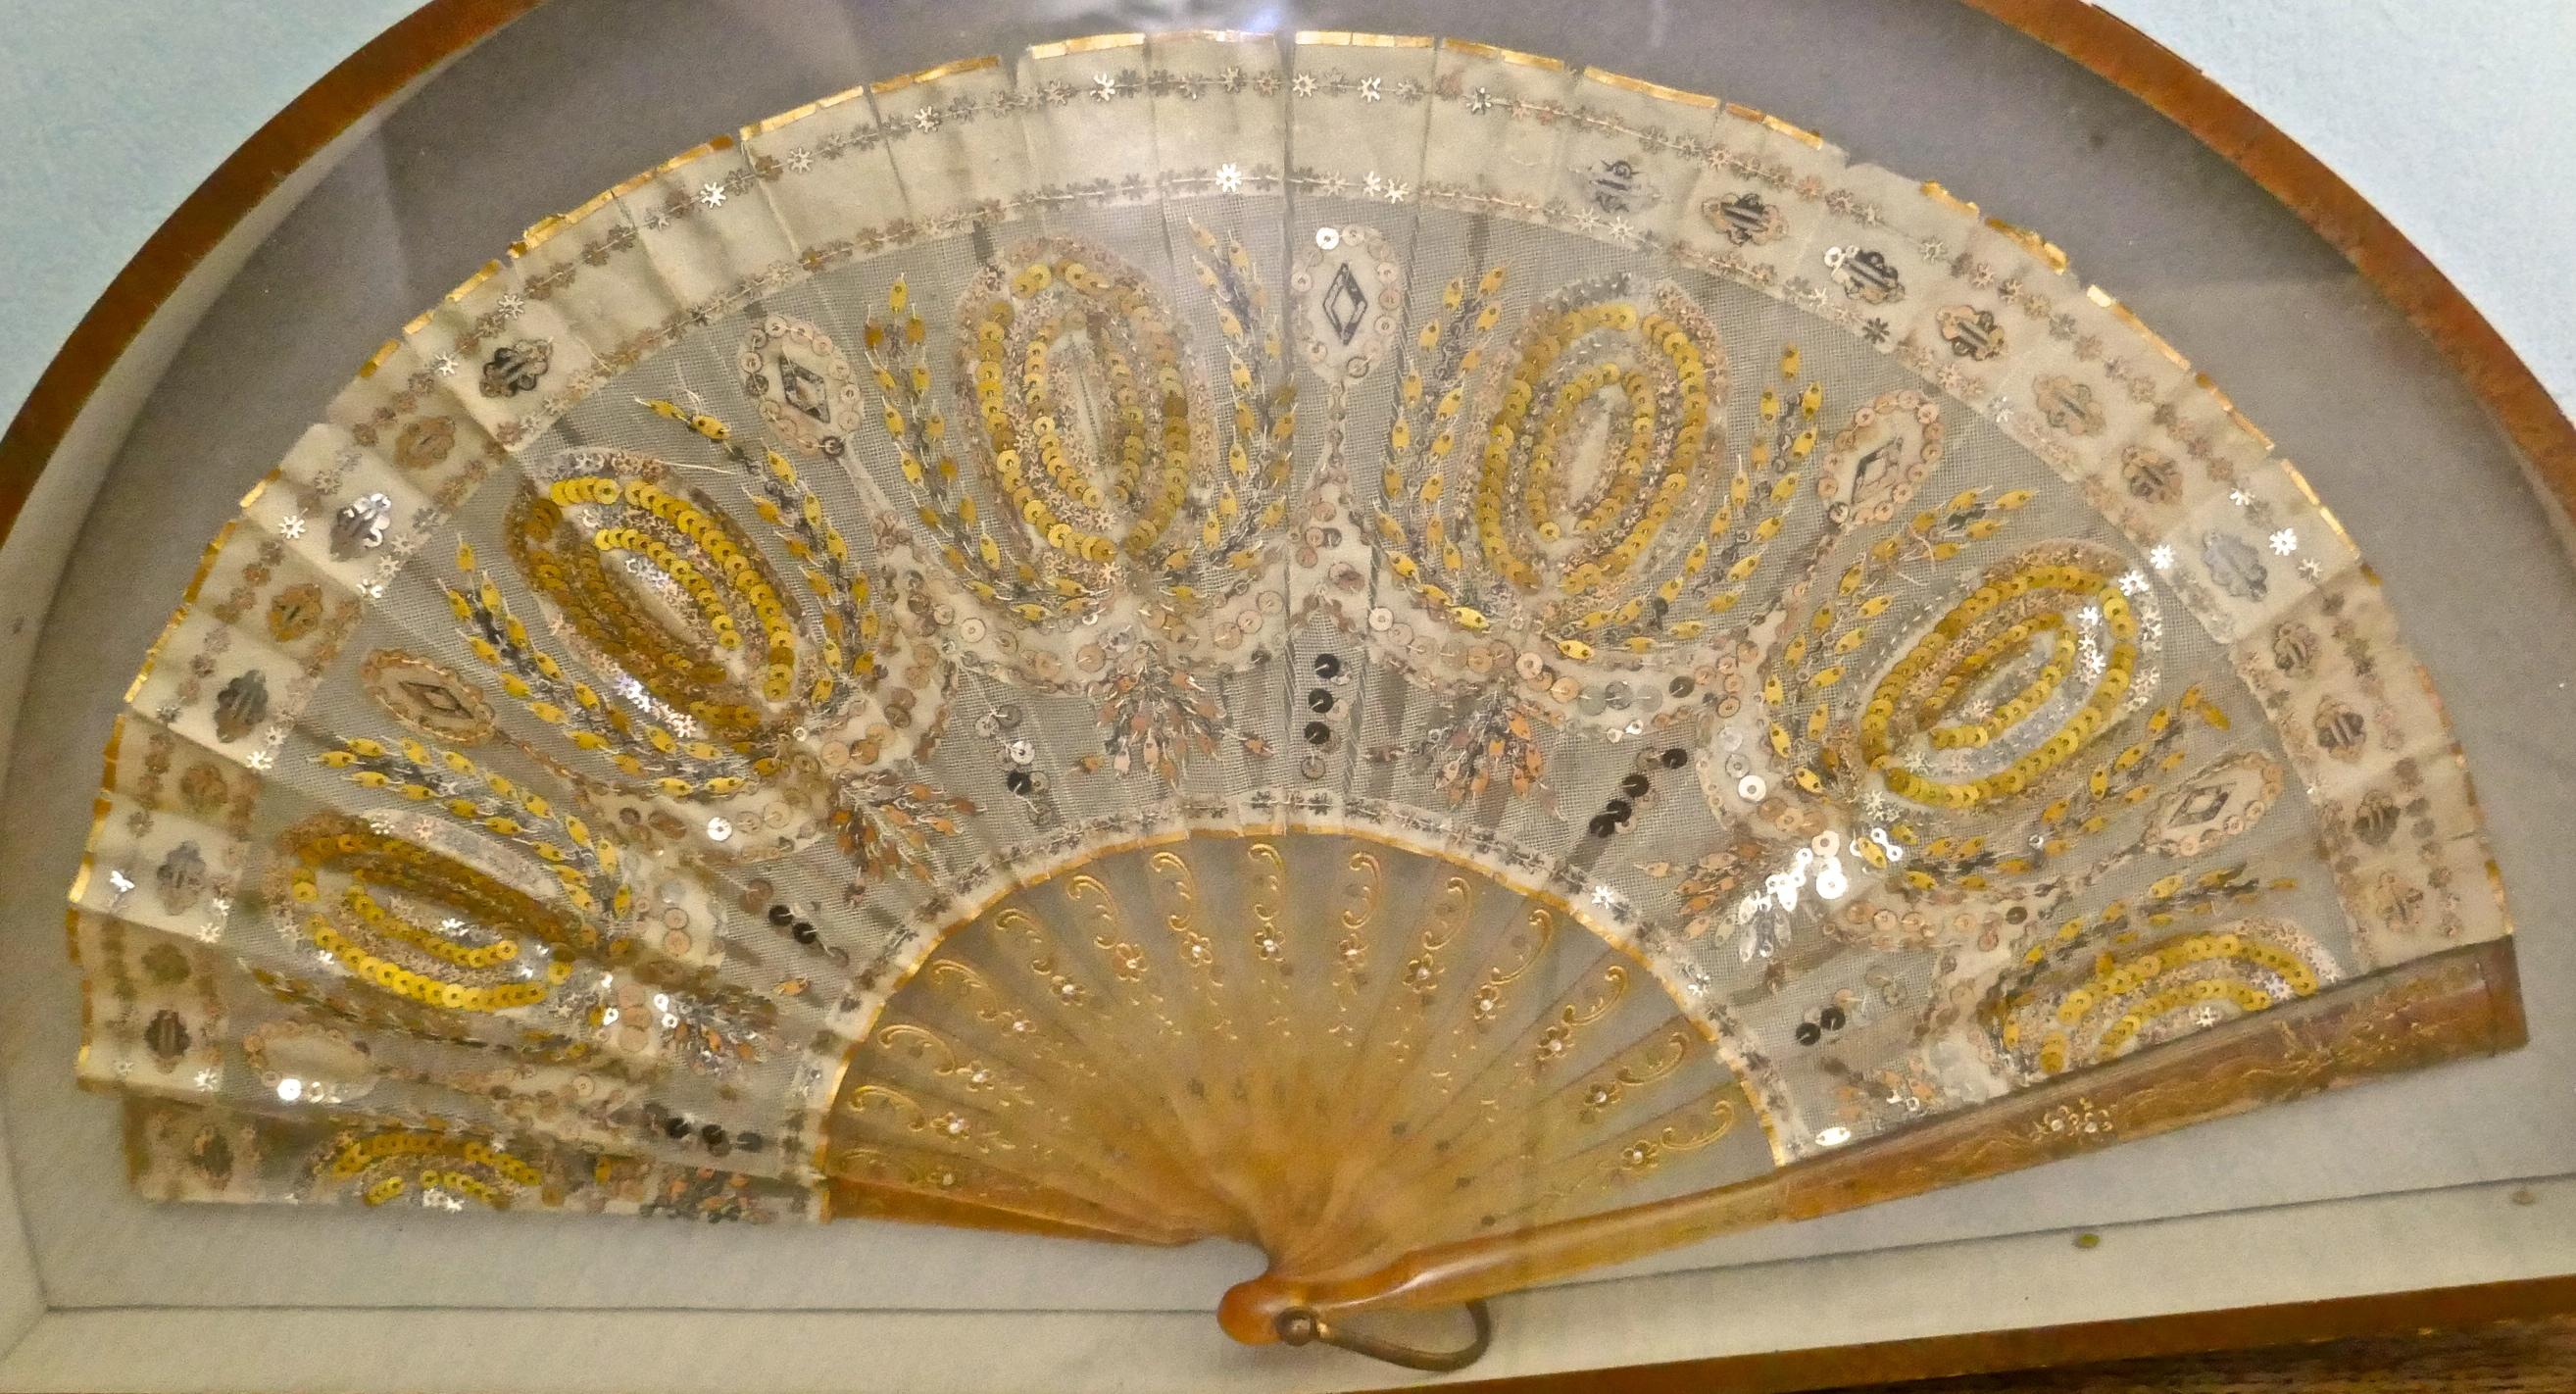 19th Century French Silk, Gold and Silver Formal Evening Fan

A Beautiful treasured piece preserved in a purpose made Frame

The fan has the most superb detail, it is made in fine silk gauze and is decorated with tiny silver and gold sequins (all